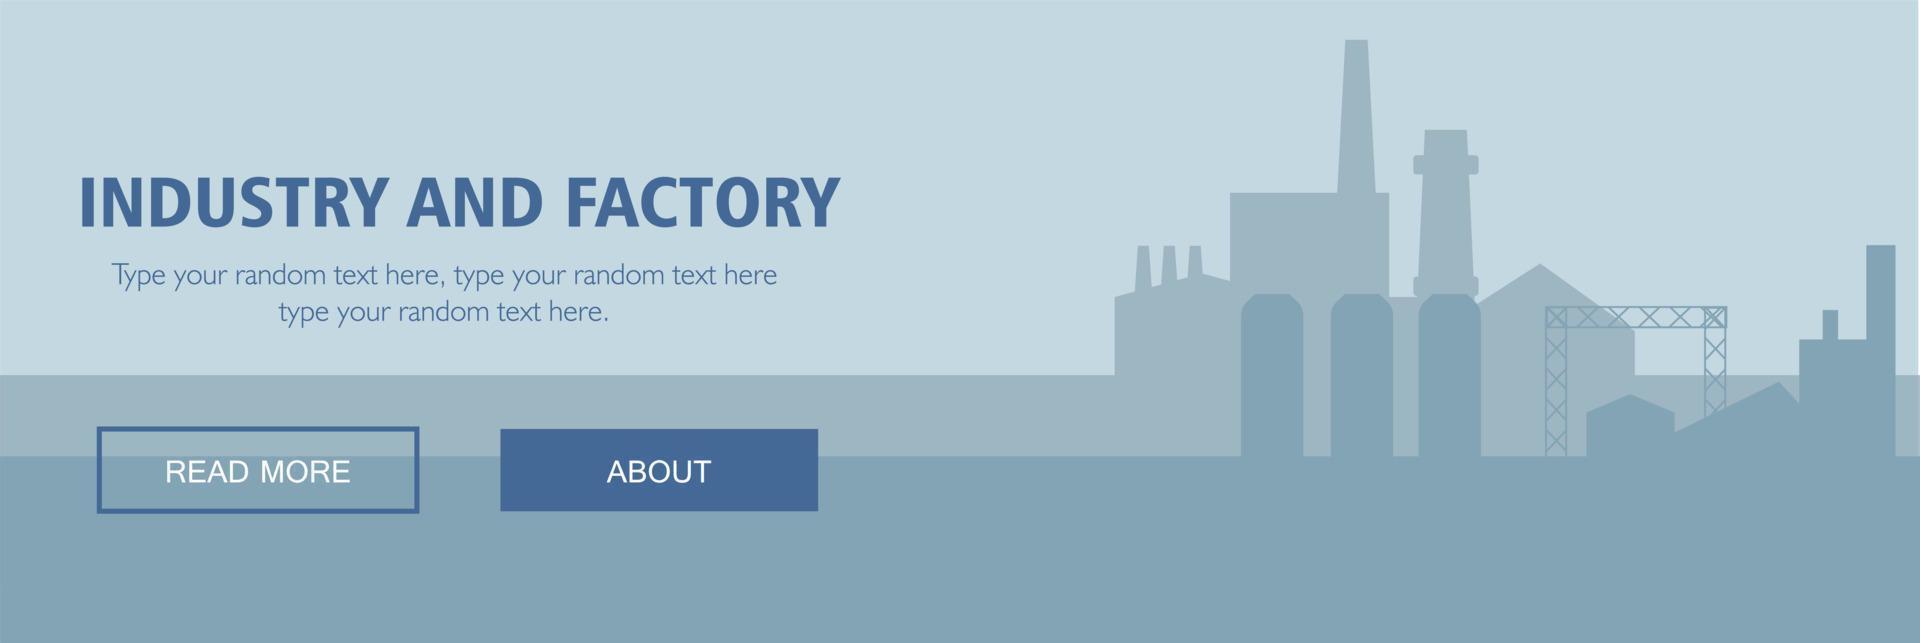 Industry and factory website background, silhouetter website background illustration, factory illustration vector